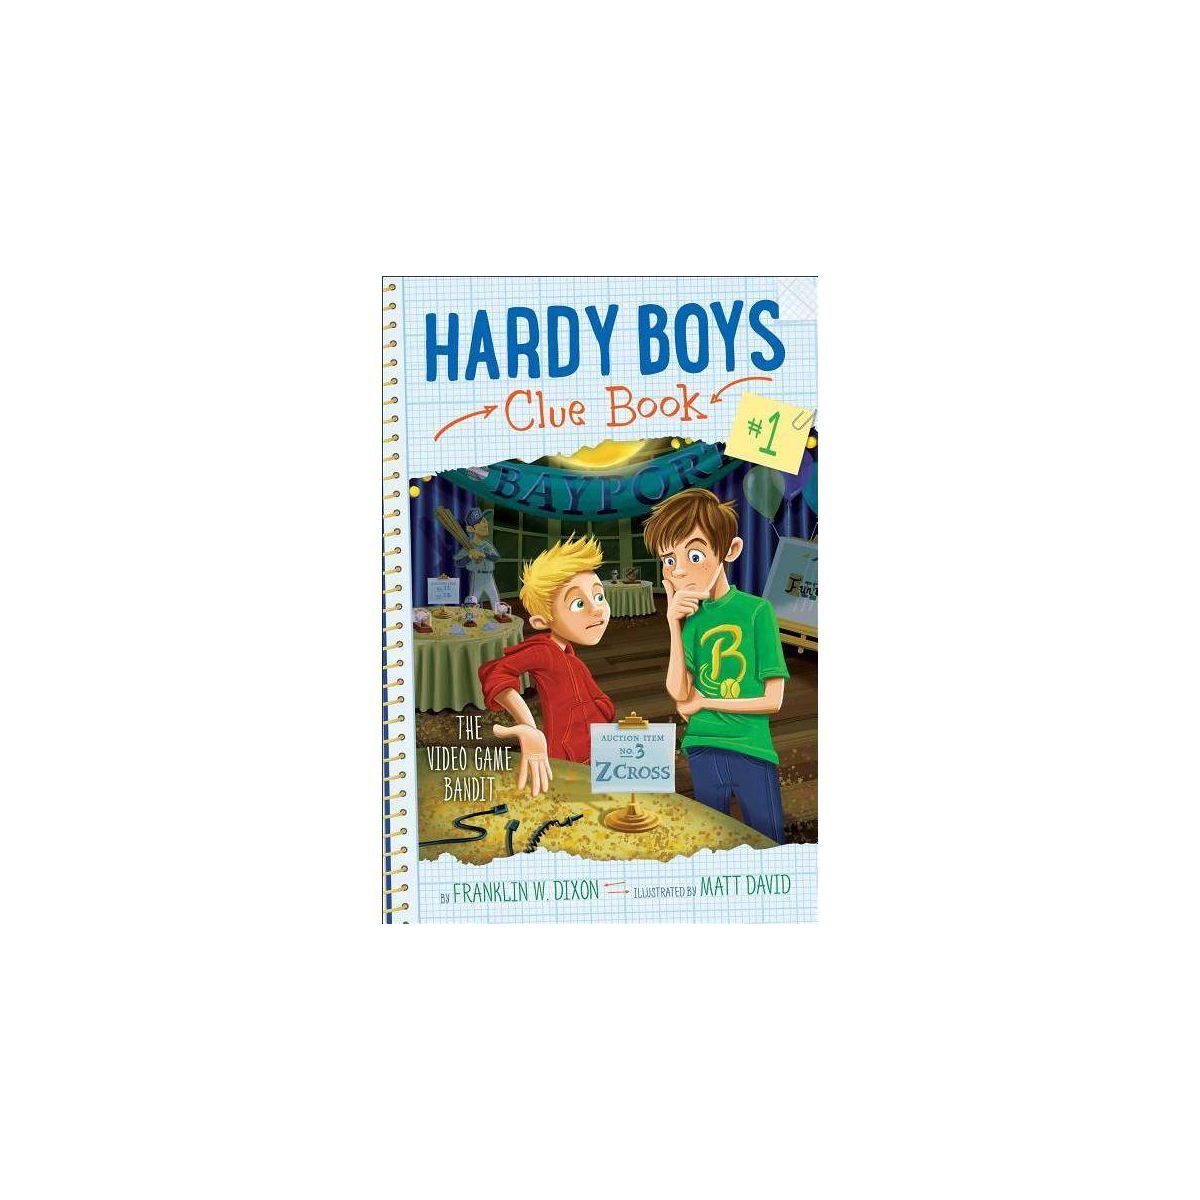 The Video Game Bandit - (Hardy Boys Clue Book) by Franklin W Dixon | Target